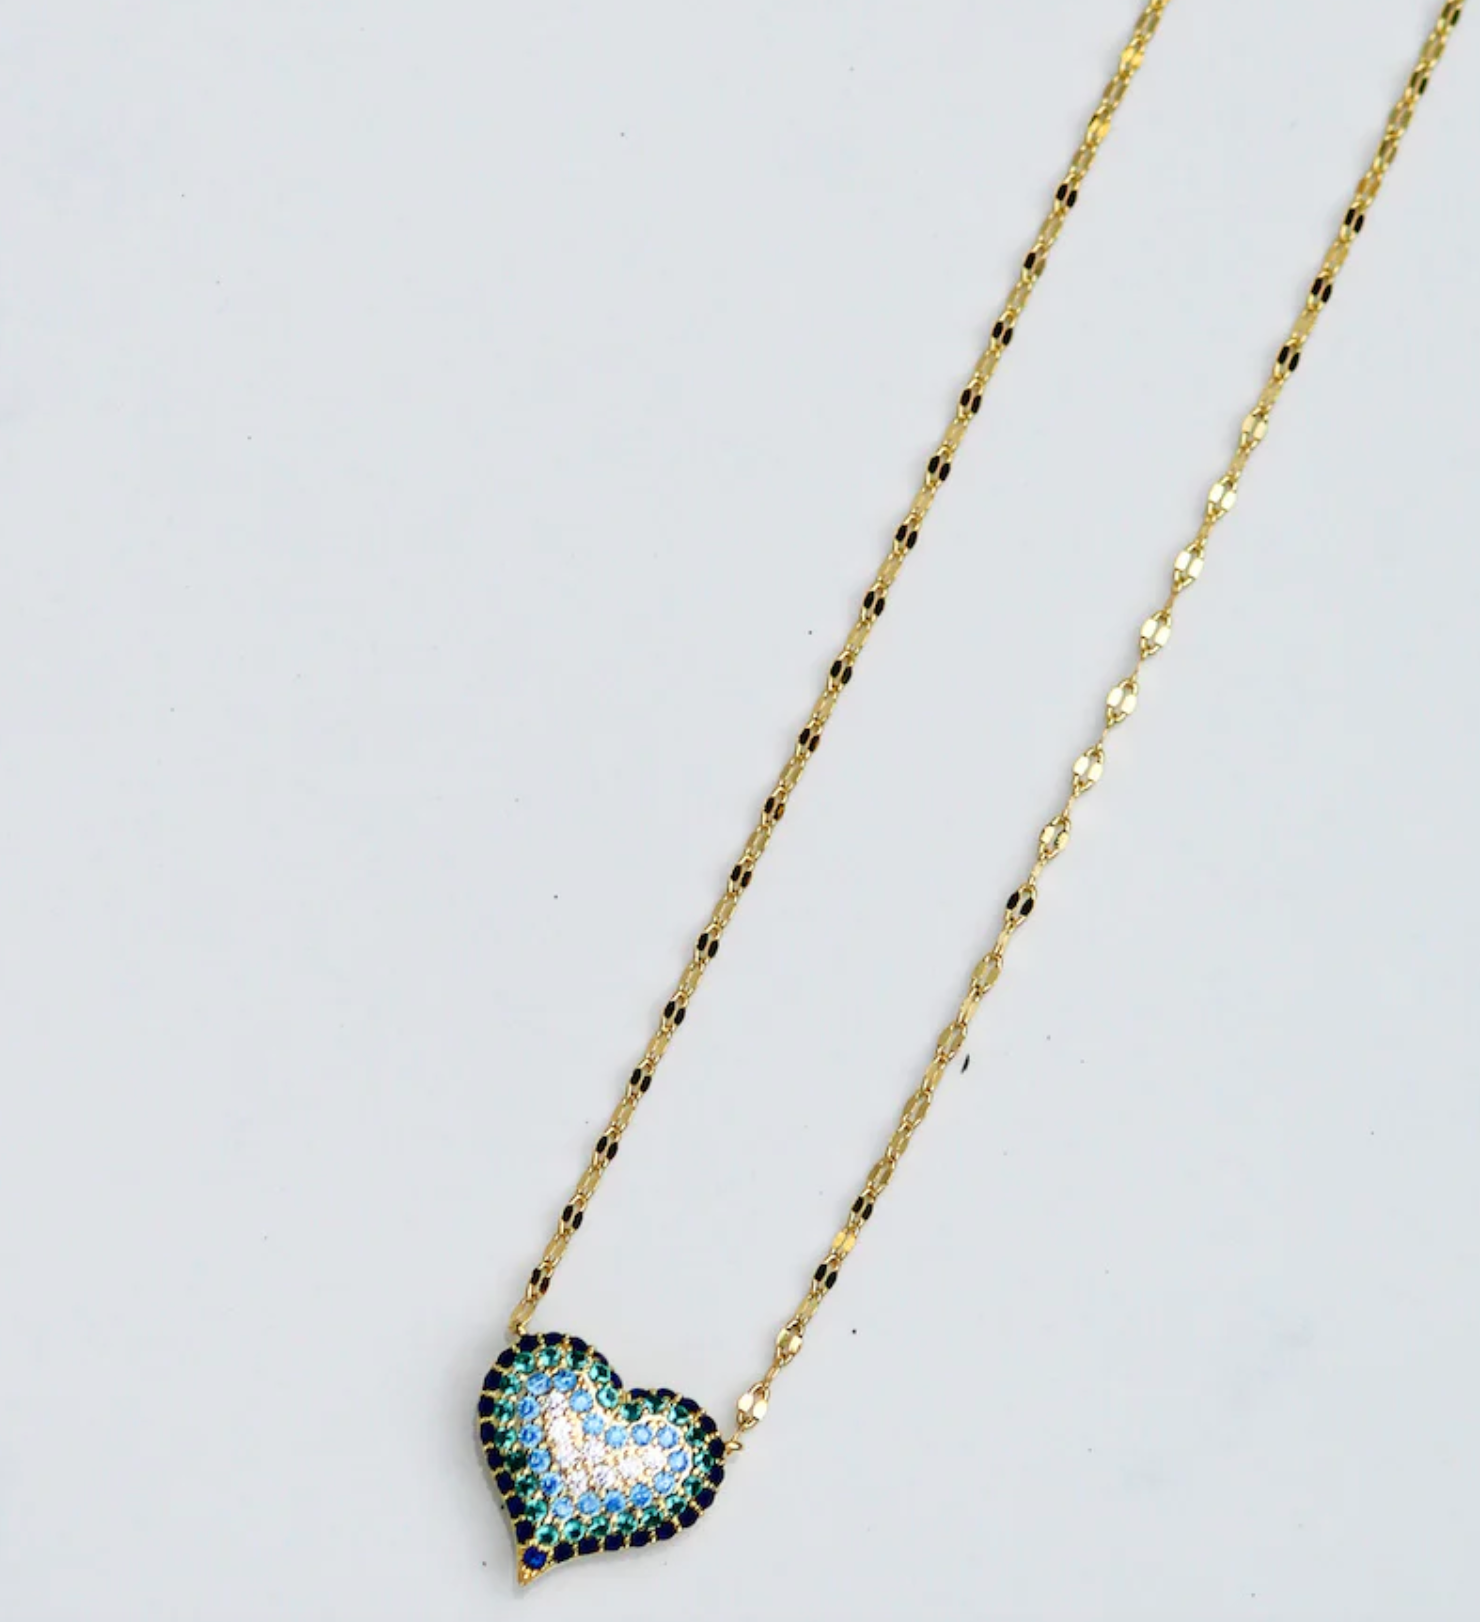 Queen of Hearts Necklace - Blue